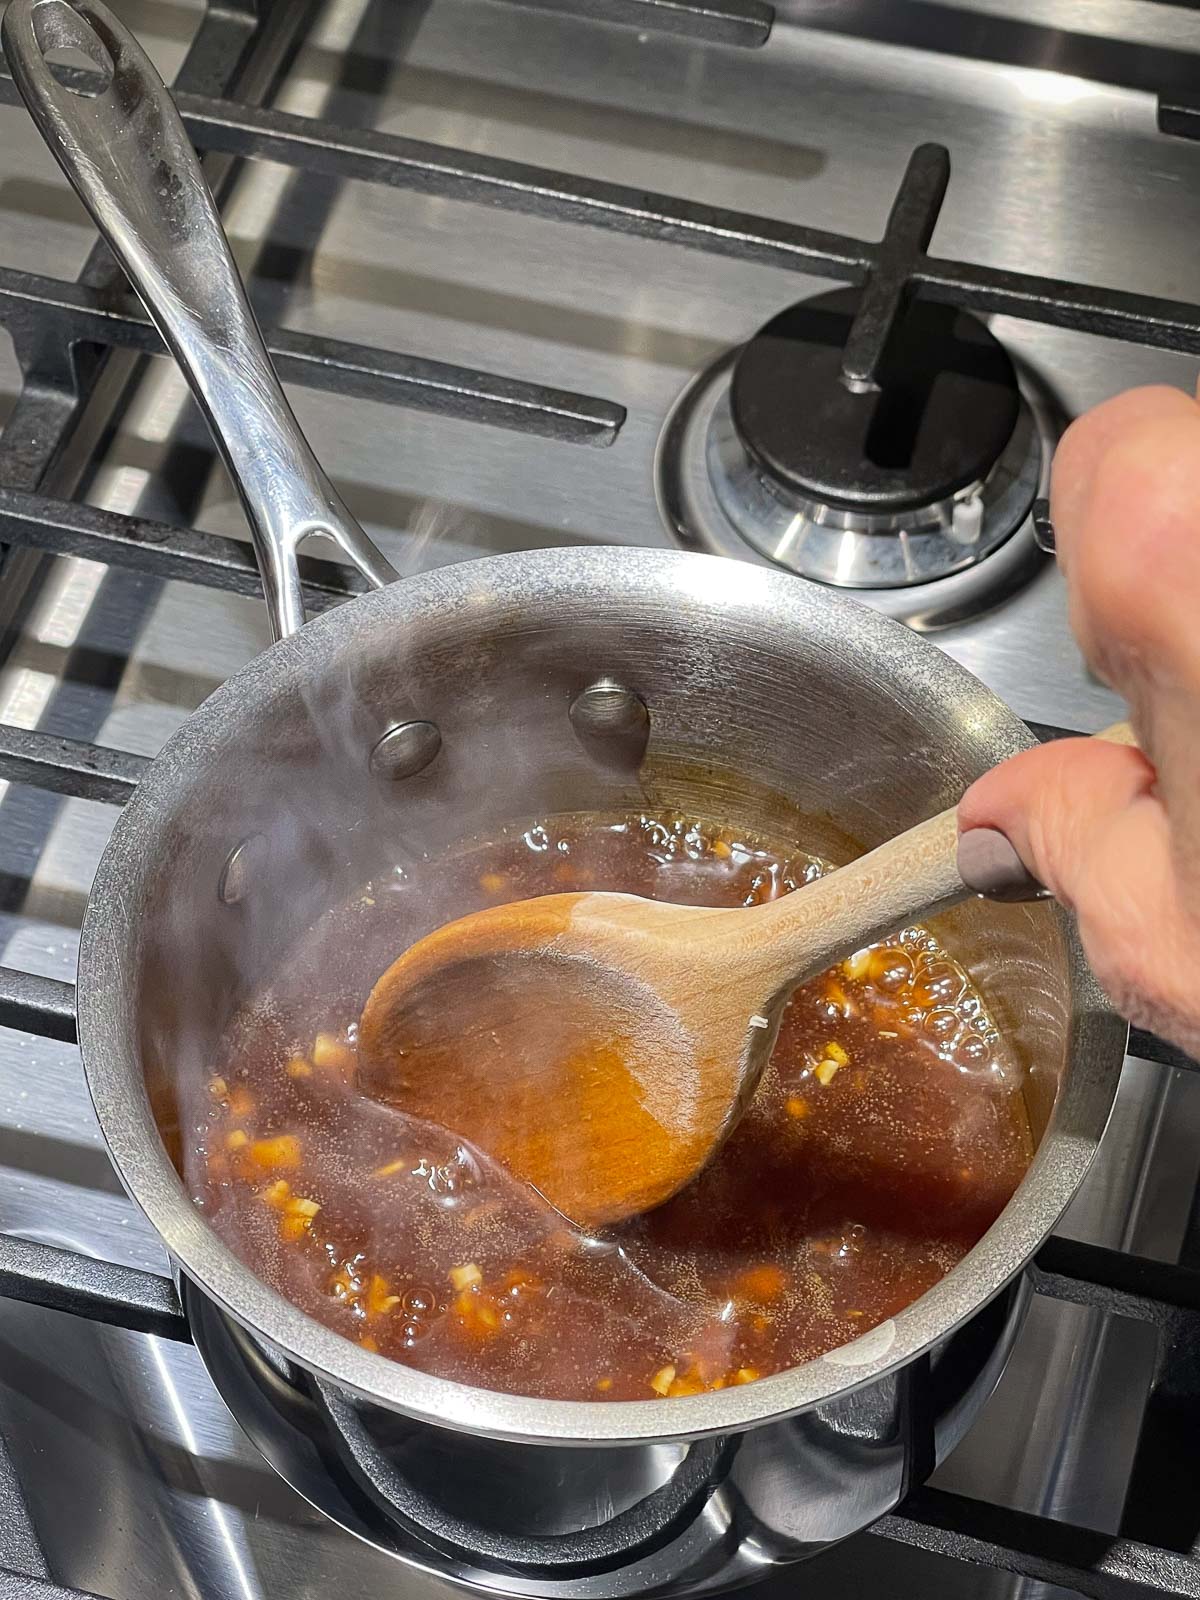 An Asian sauce being stirred in a sauce pot with a wooden spoon on top of a stove.